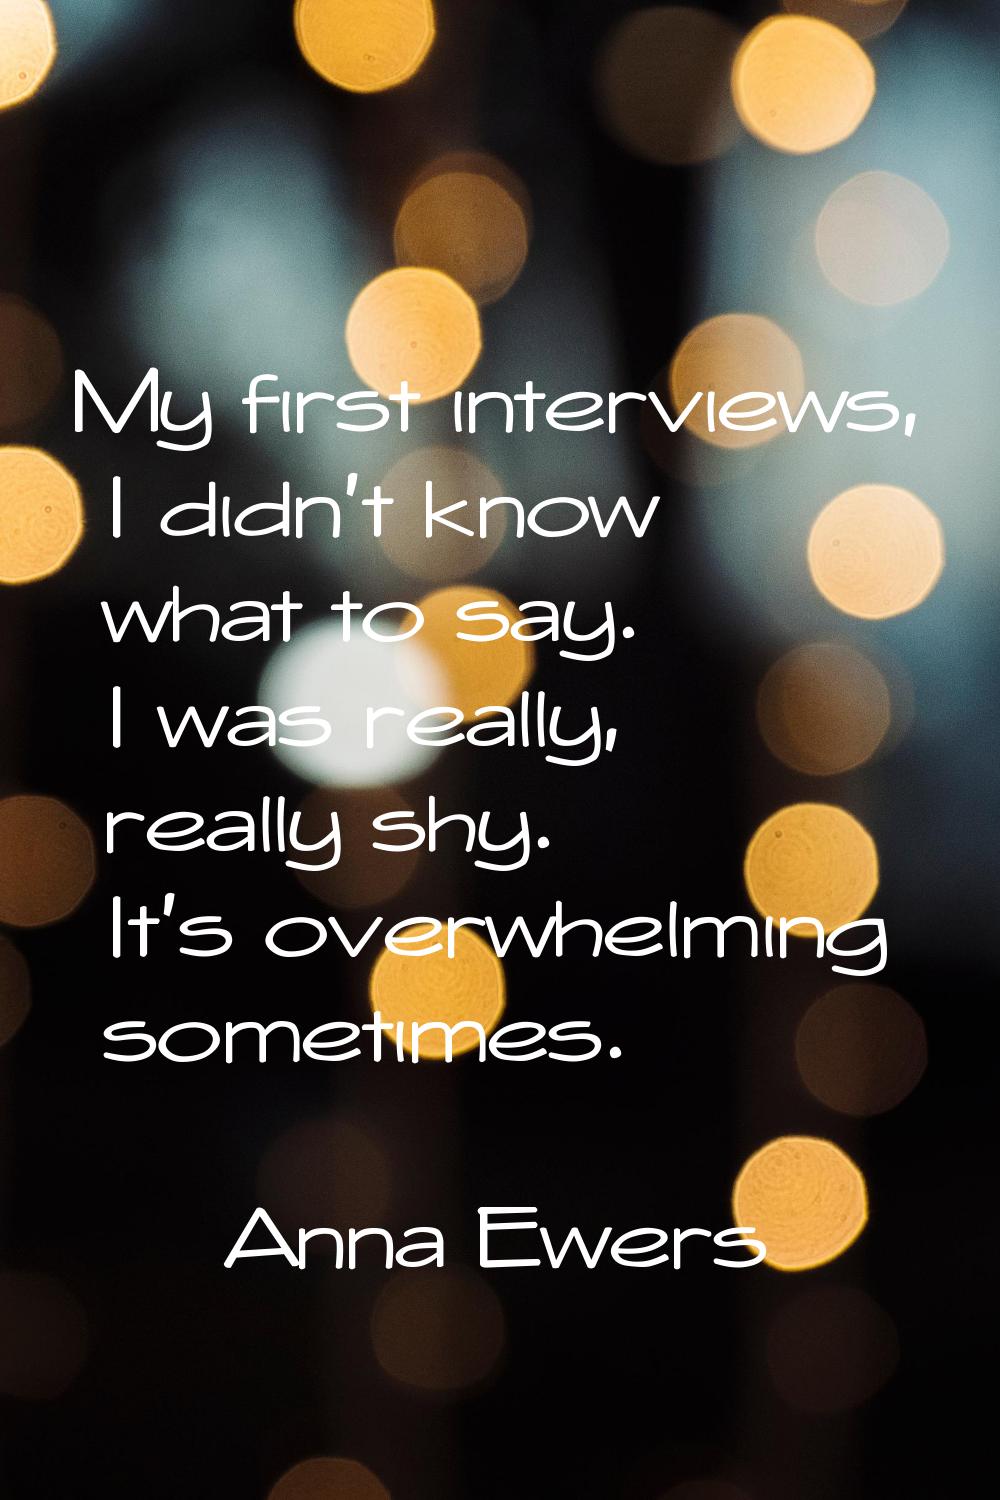 My first interviews, I didn't know what to say. I was really, really shy. It's overwhelming sometim